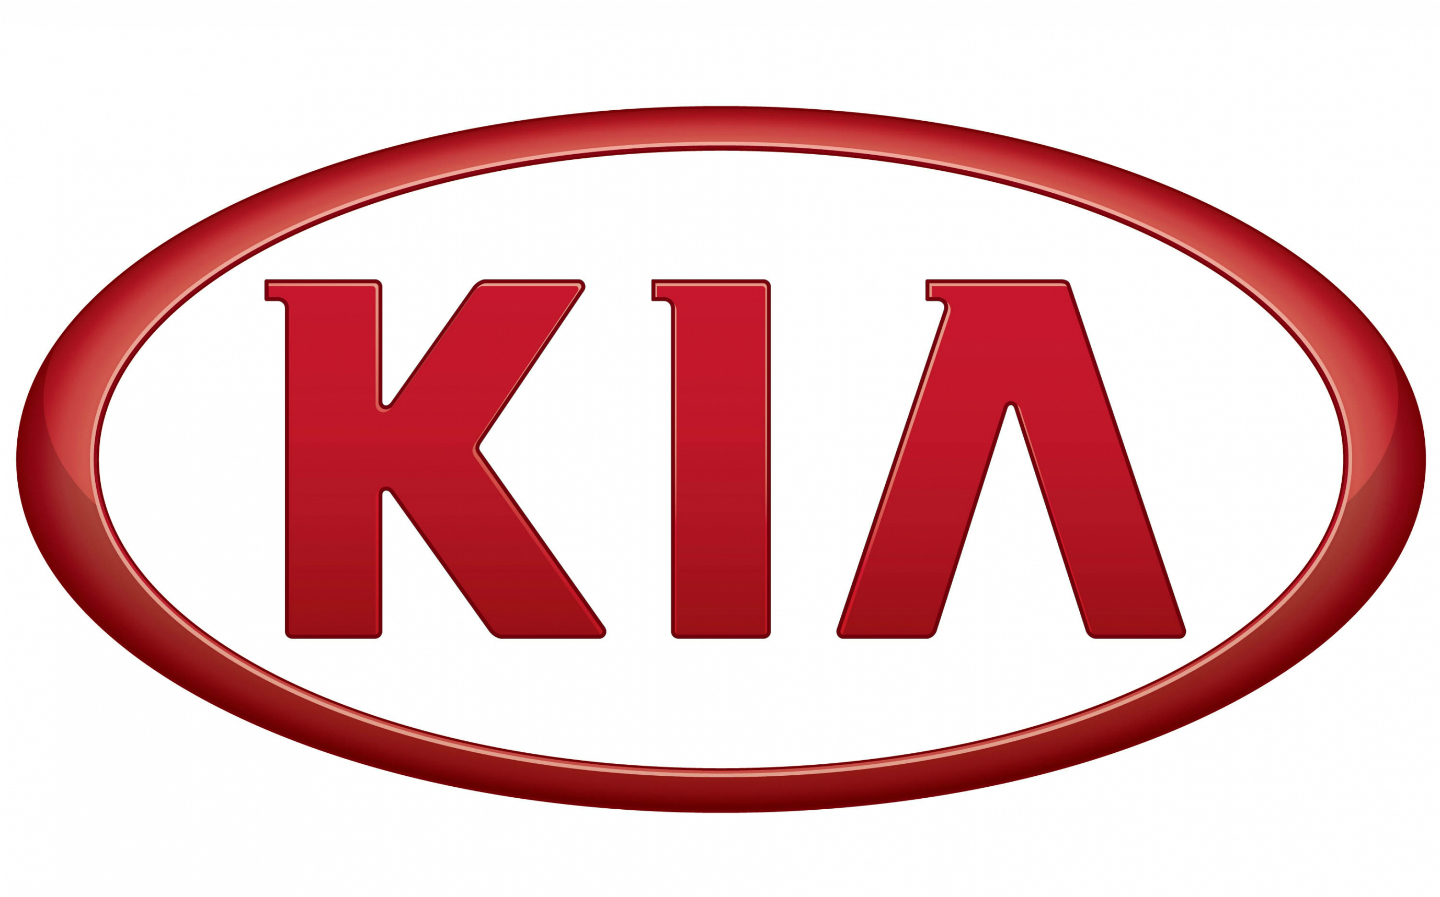 Sunday Times Motor Awards 2019 Best Car Manufacturer of the Year. Kia